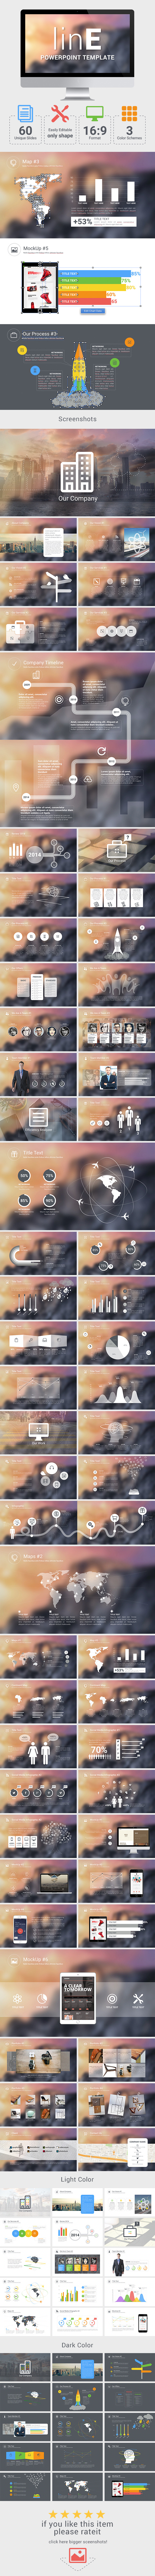 linE PowerPoint Template